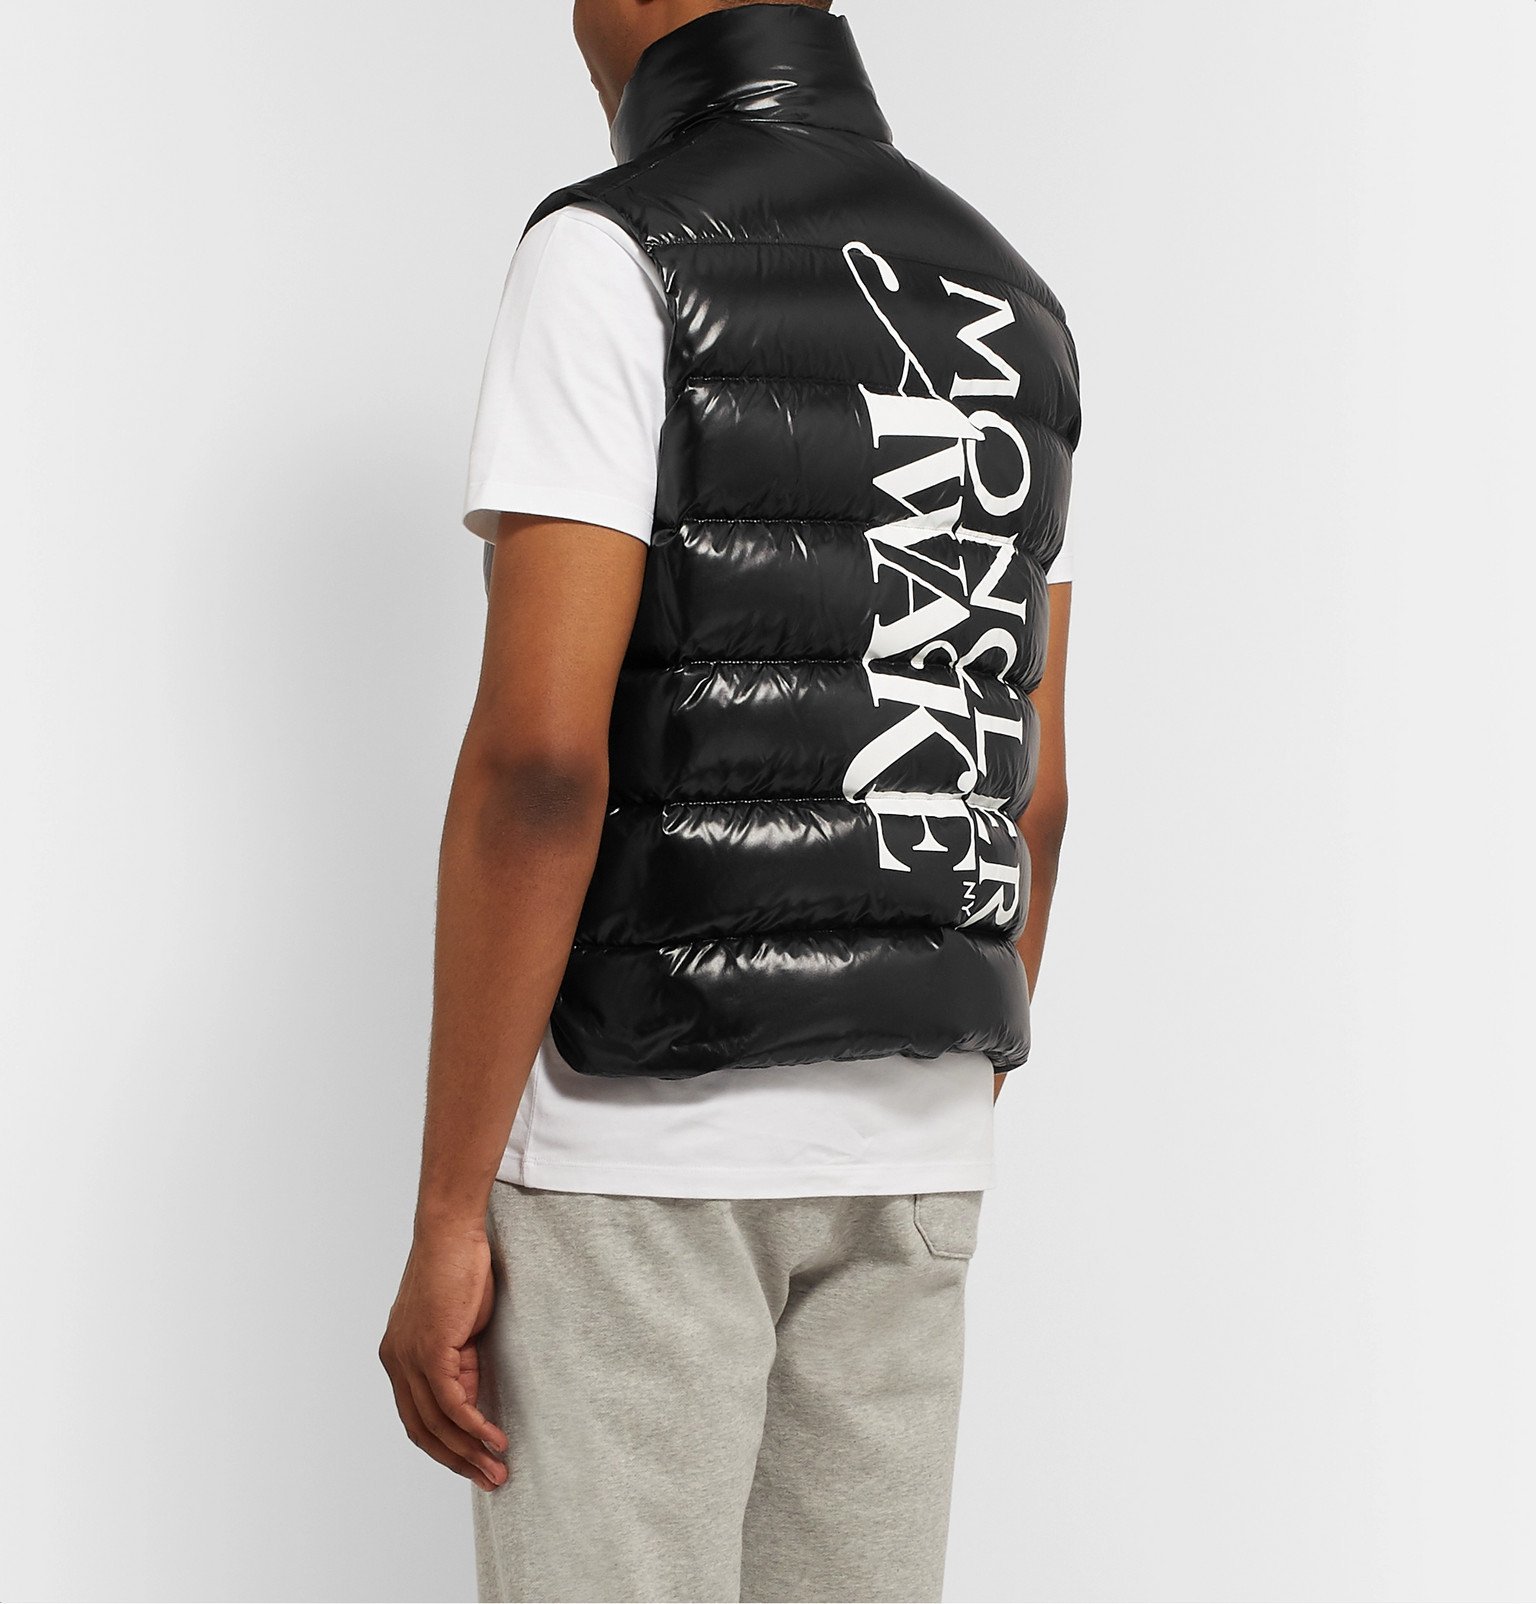 Moncler Genius - Awake NY 2 Moncler 1952 Parker Printed Quilted 